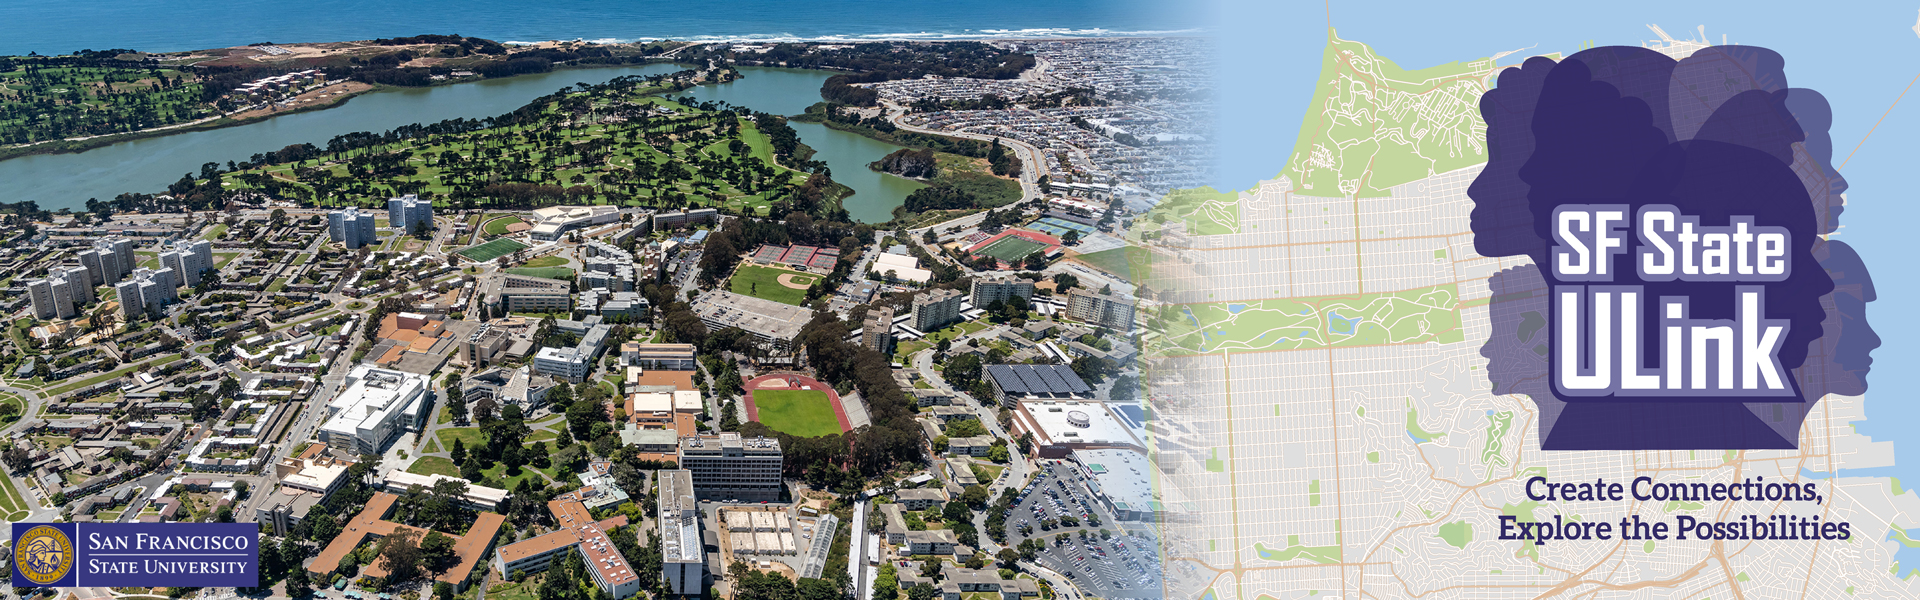 Aerial view of SF State campus and SF State ULink logo